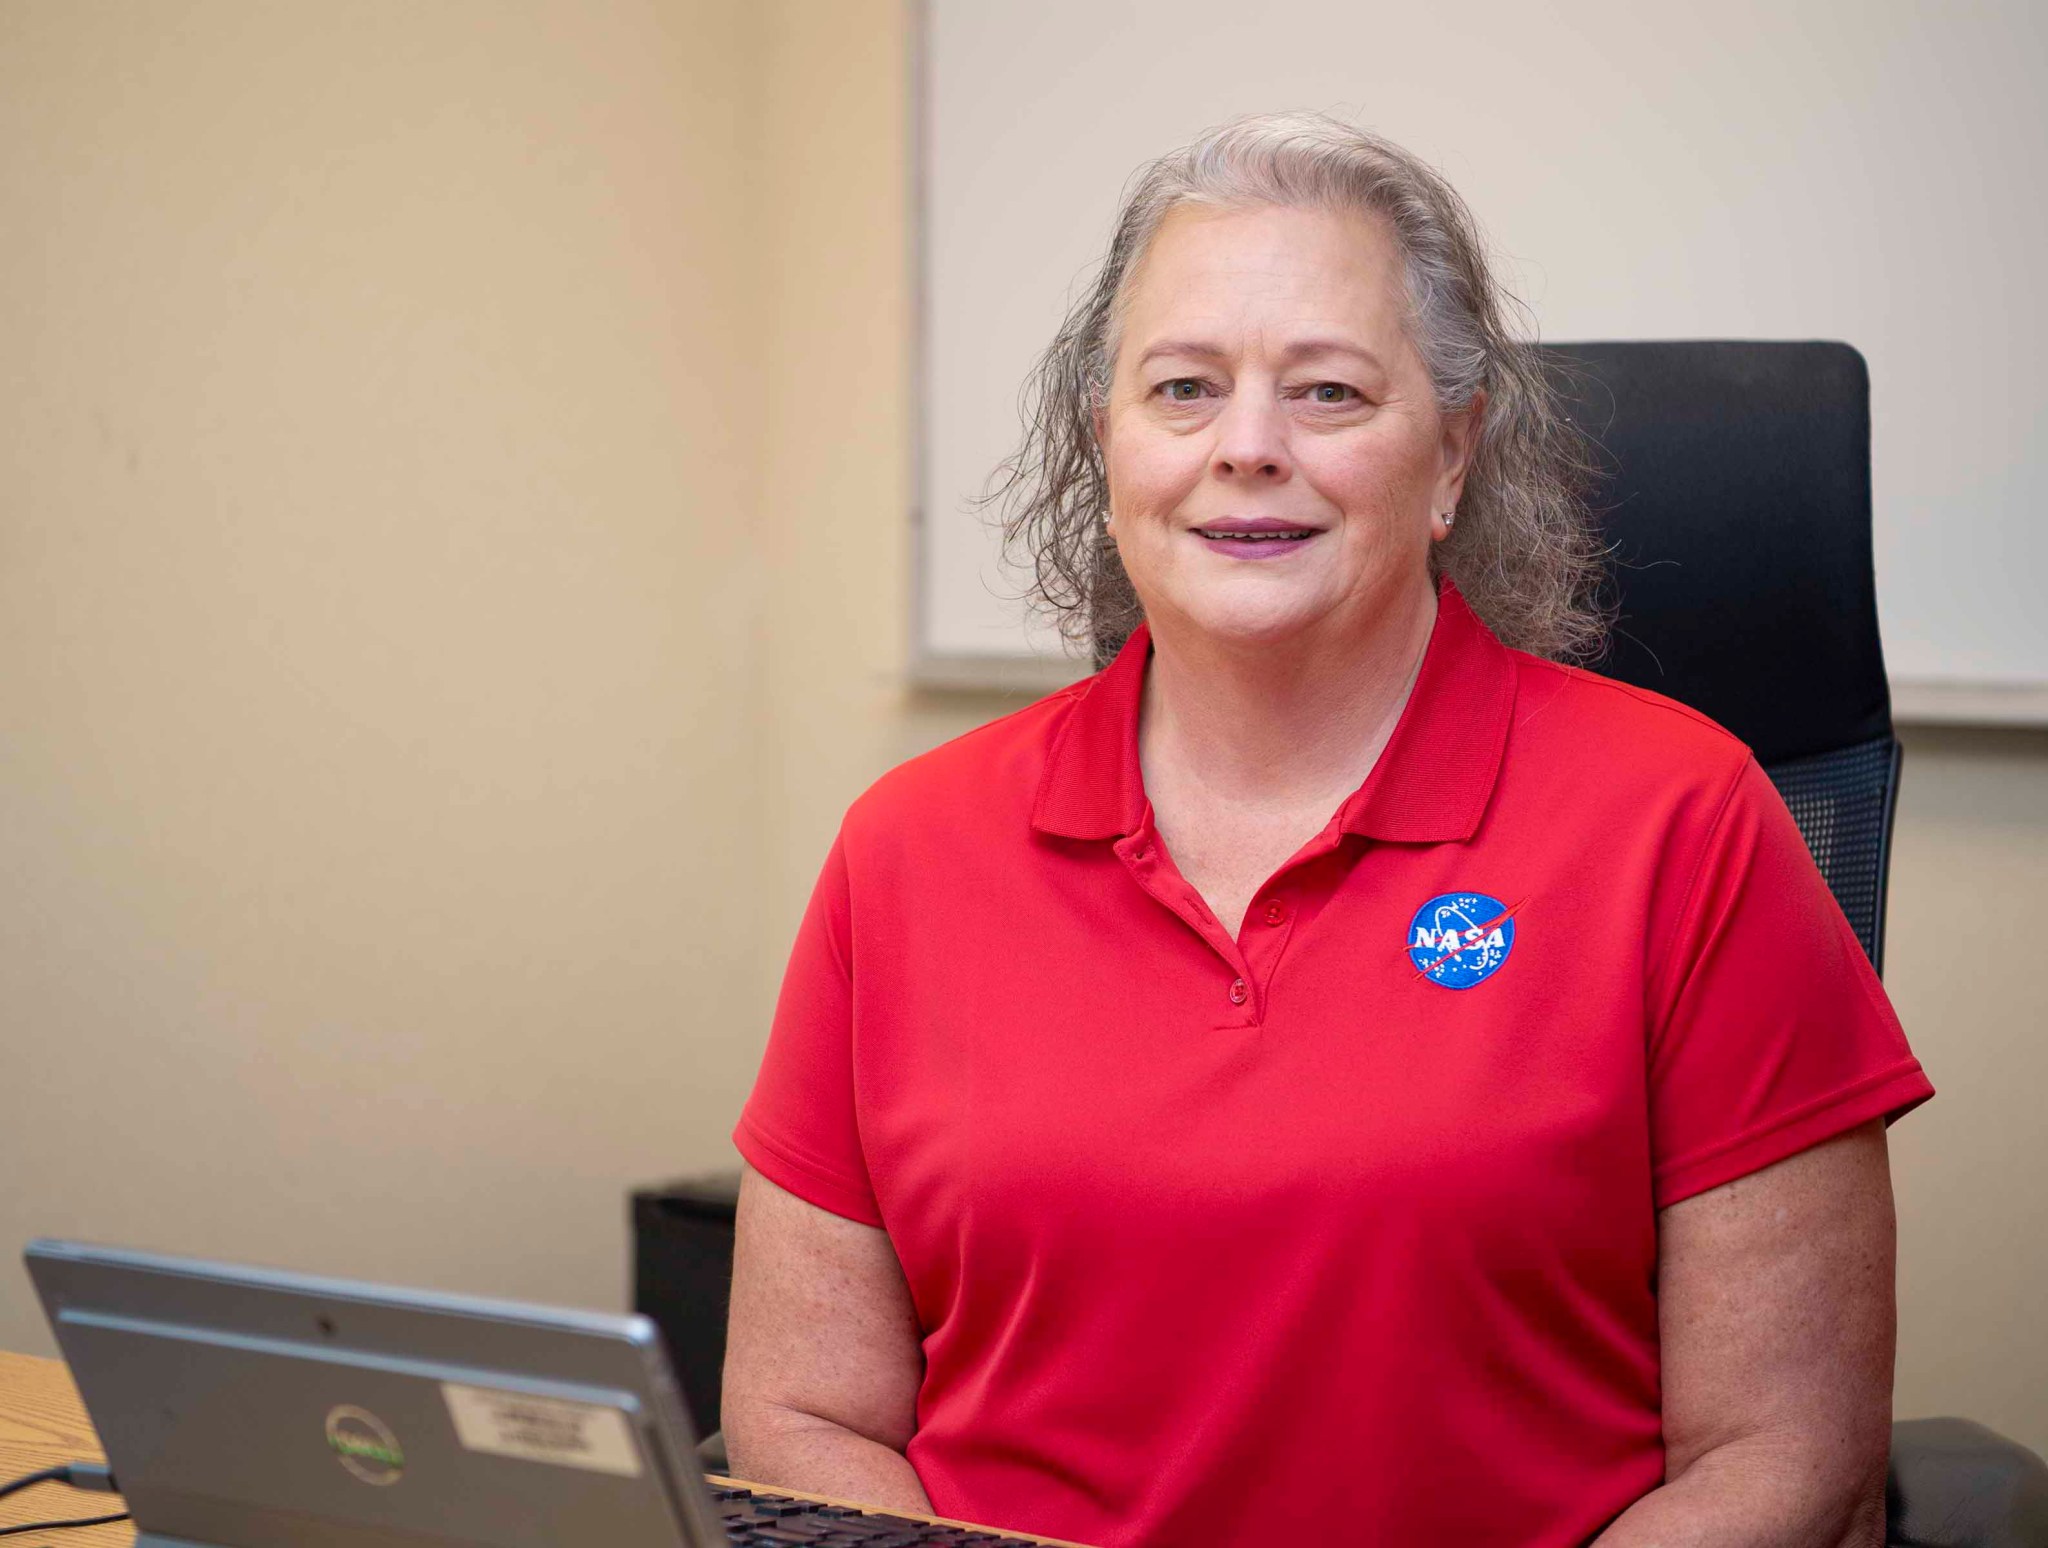 Rae Anderson, wearing a red polo shirt with the NASA meatball on the pocket, smiles at the camera while using her laptop.